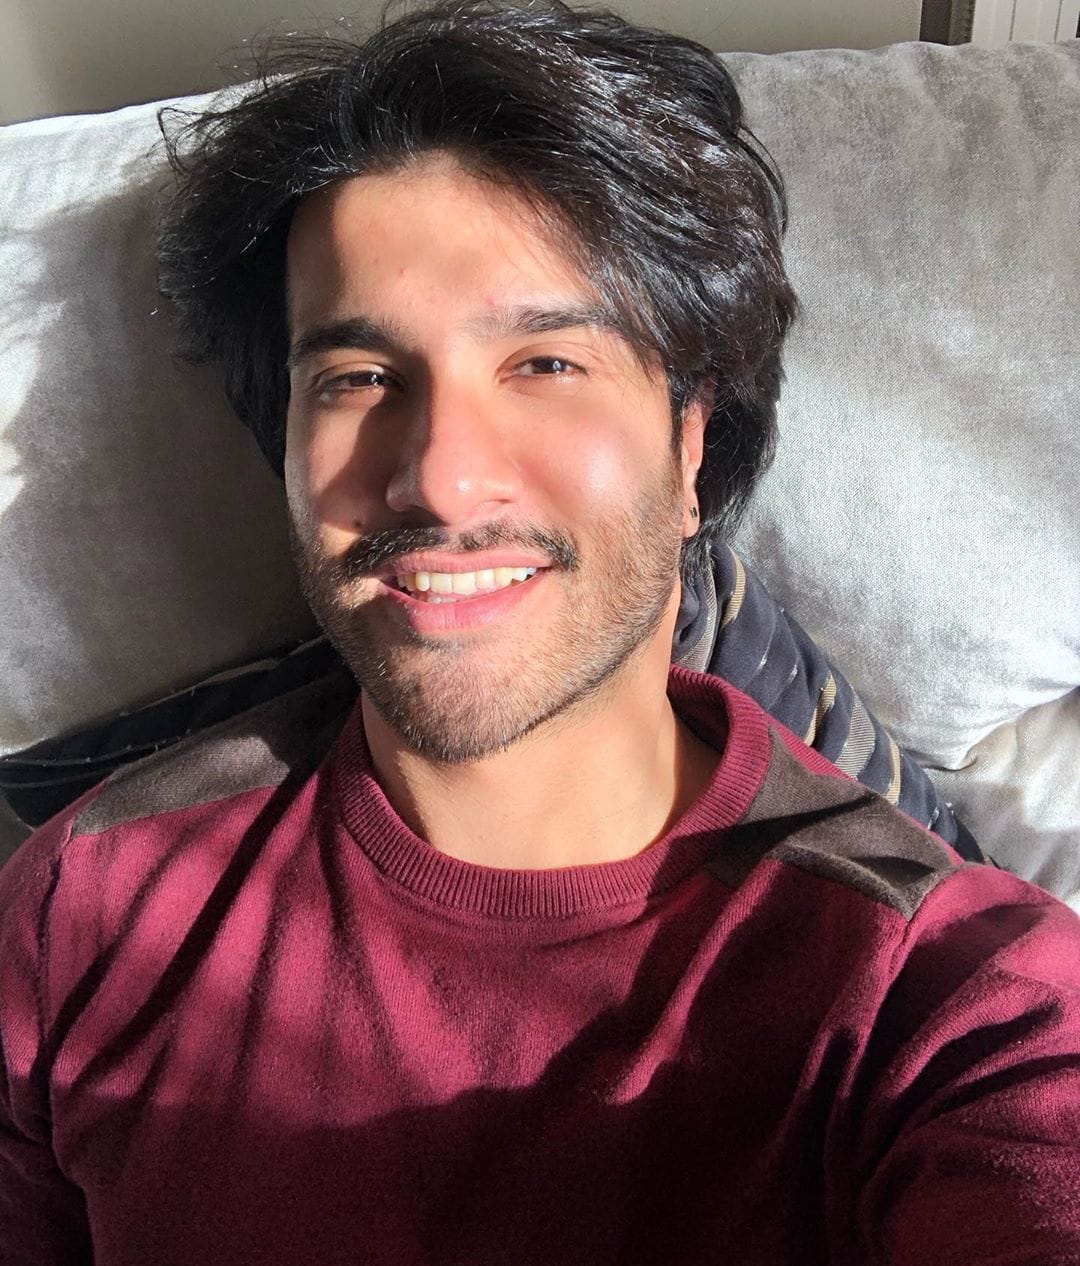 Feroze Khan - Biography, Age, Education, Wife, Career, and Much More!